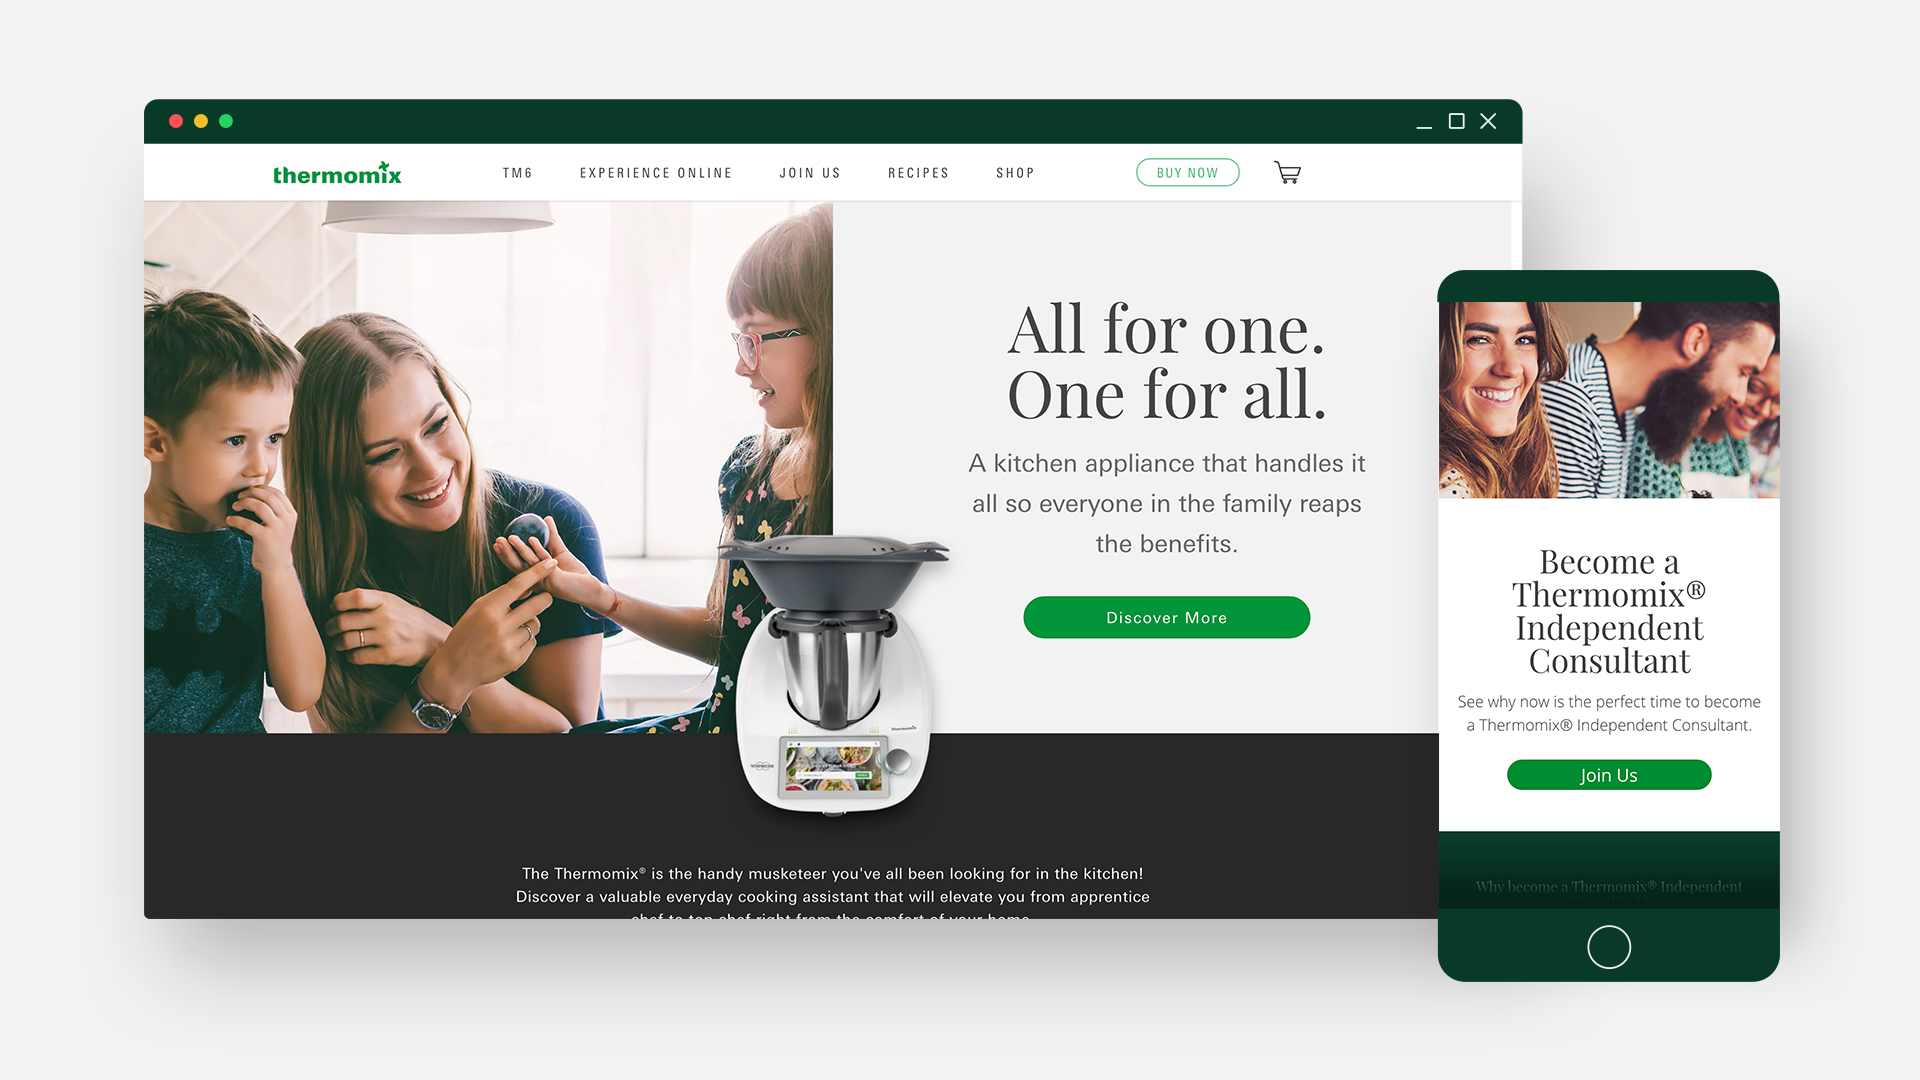 VIBRANT_Thermomix_Launch_Digital-Content_Main Image_1920x1080